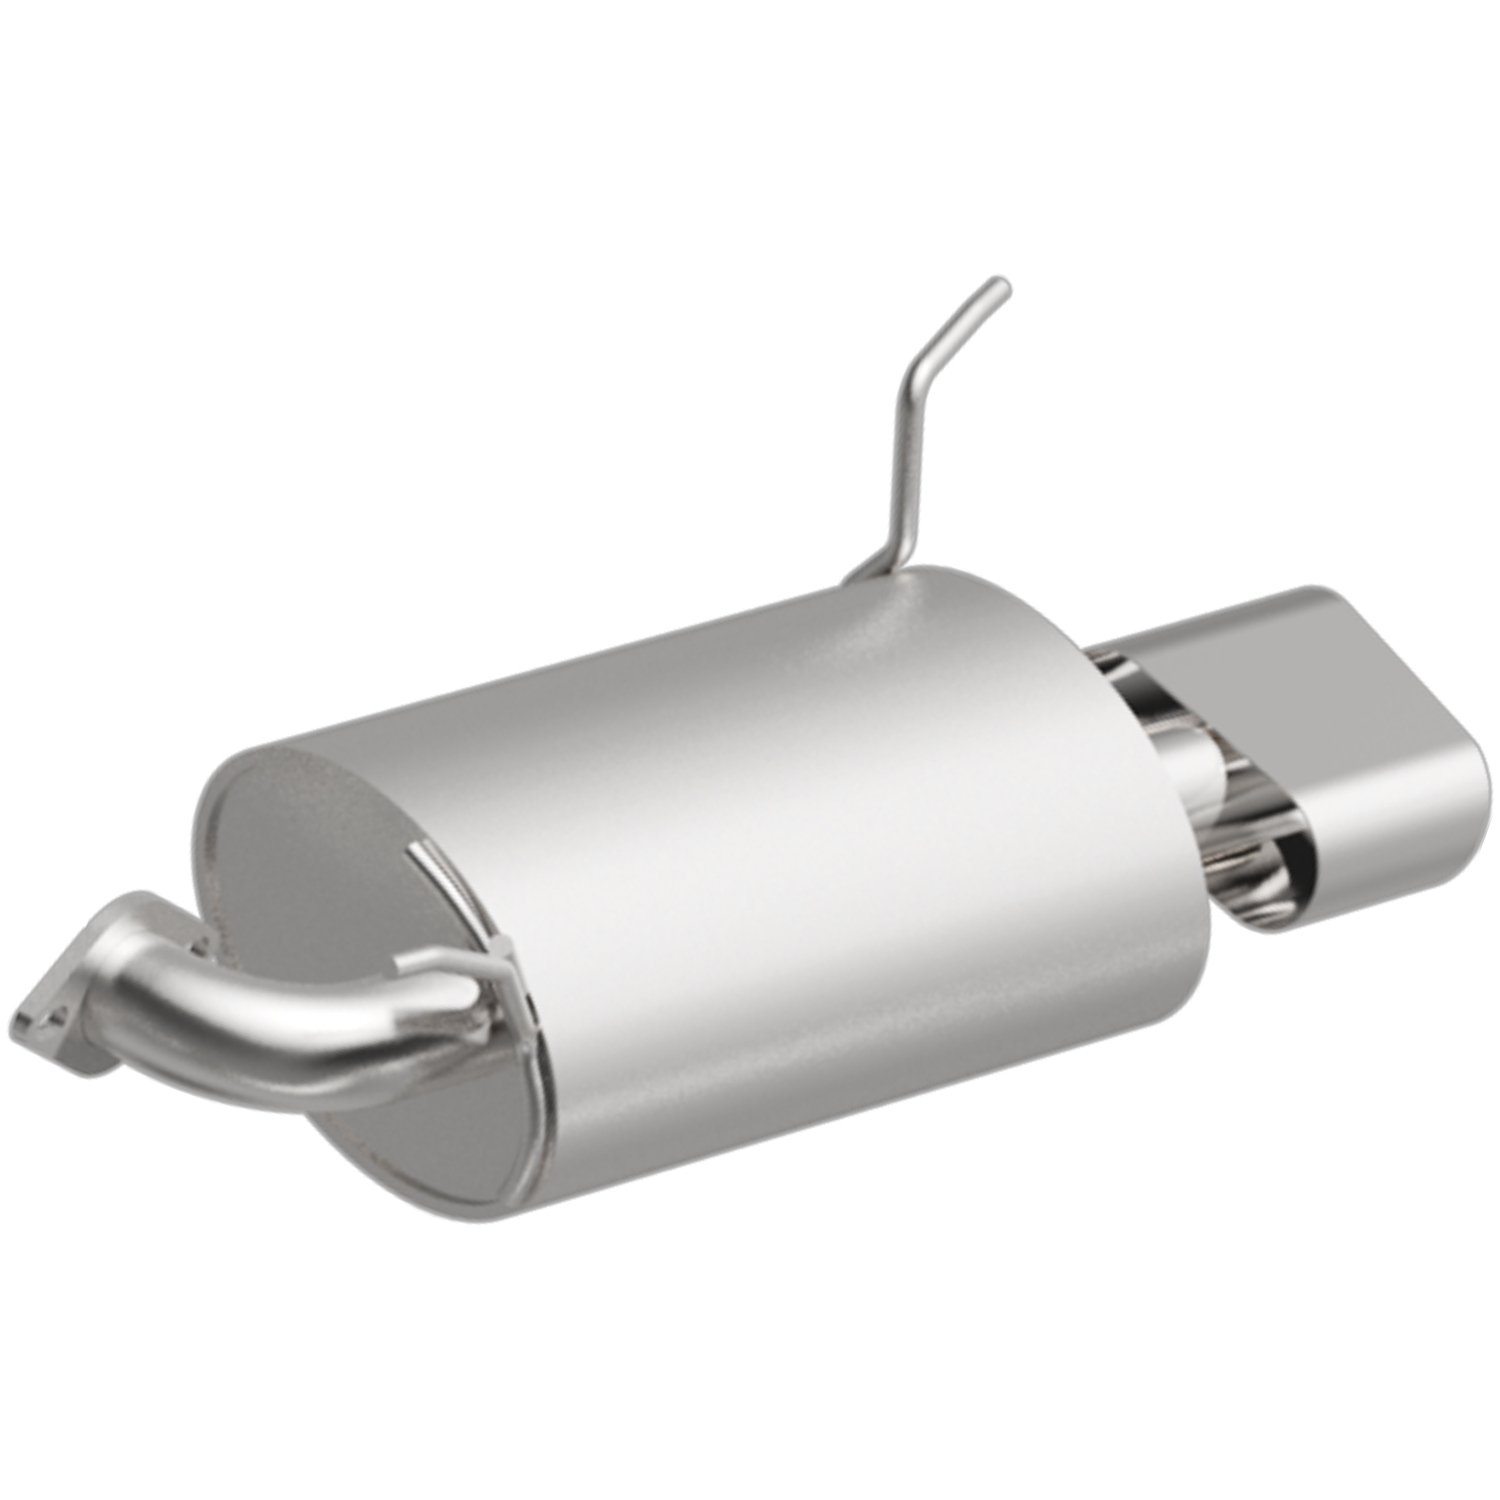 Direct-Fit Exhaust Muffler, 2004-2006 Acura MDX 3.5L